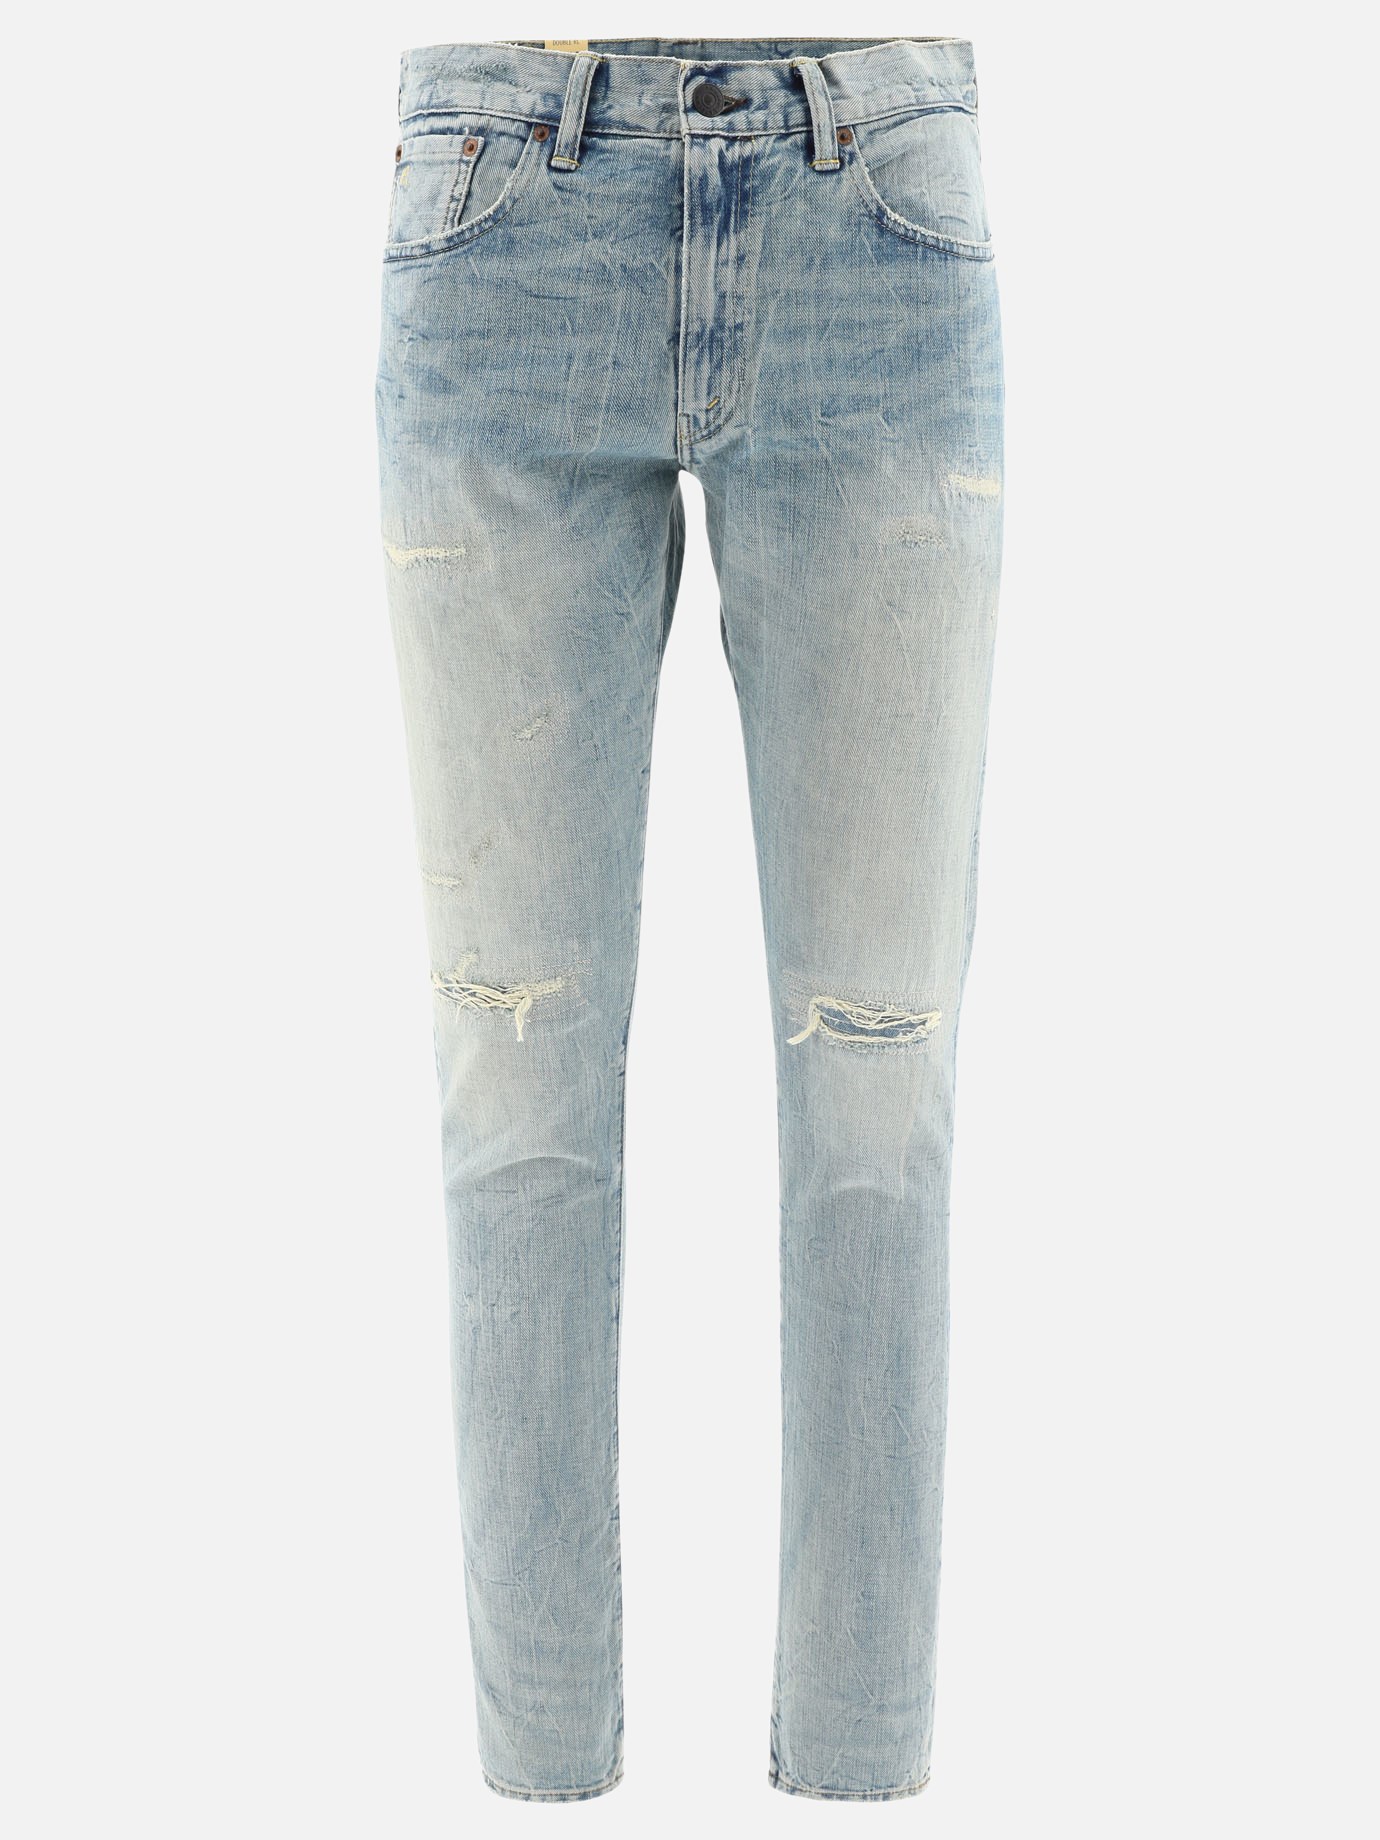 Jeans  Stratham by RRL by Ralph Lauren - 2